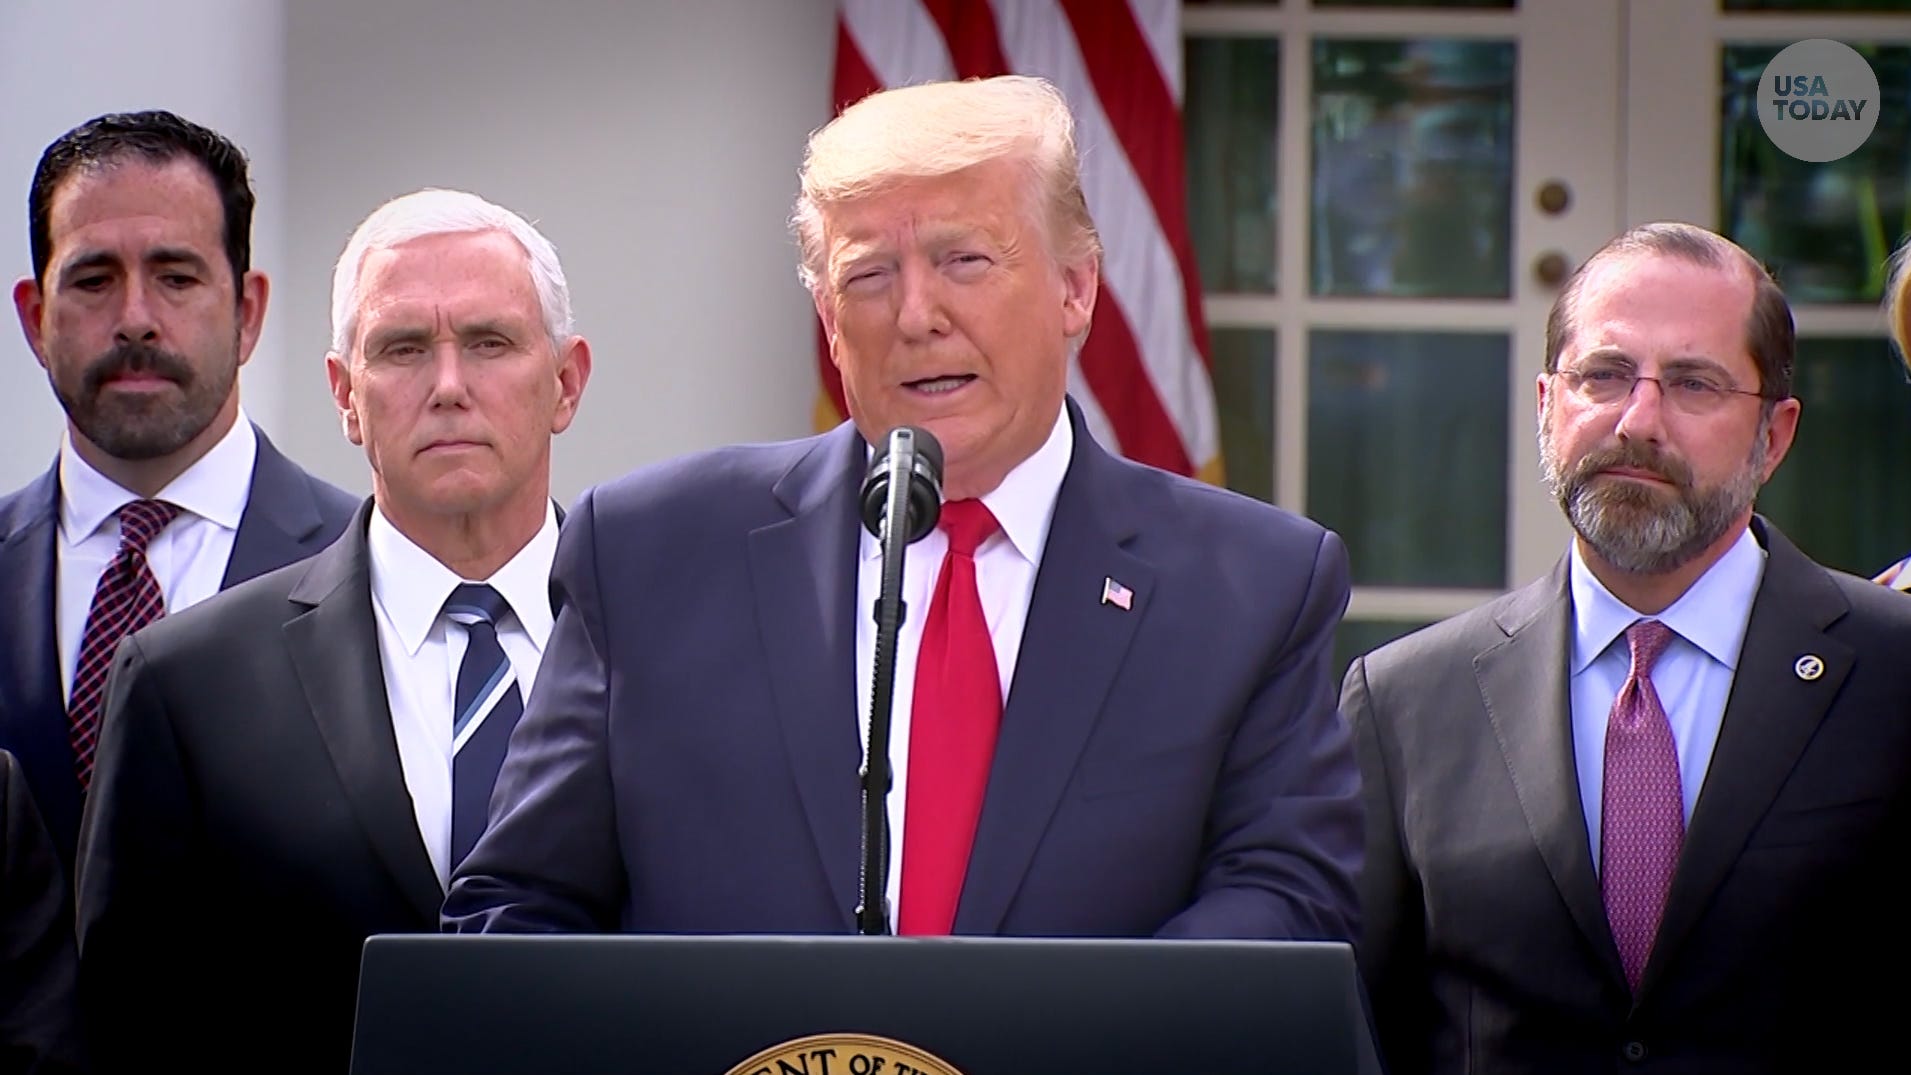 Trump says he took coronavirus test as those around president, Pence have temperatures monitored